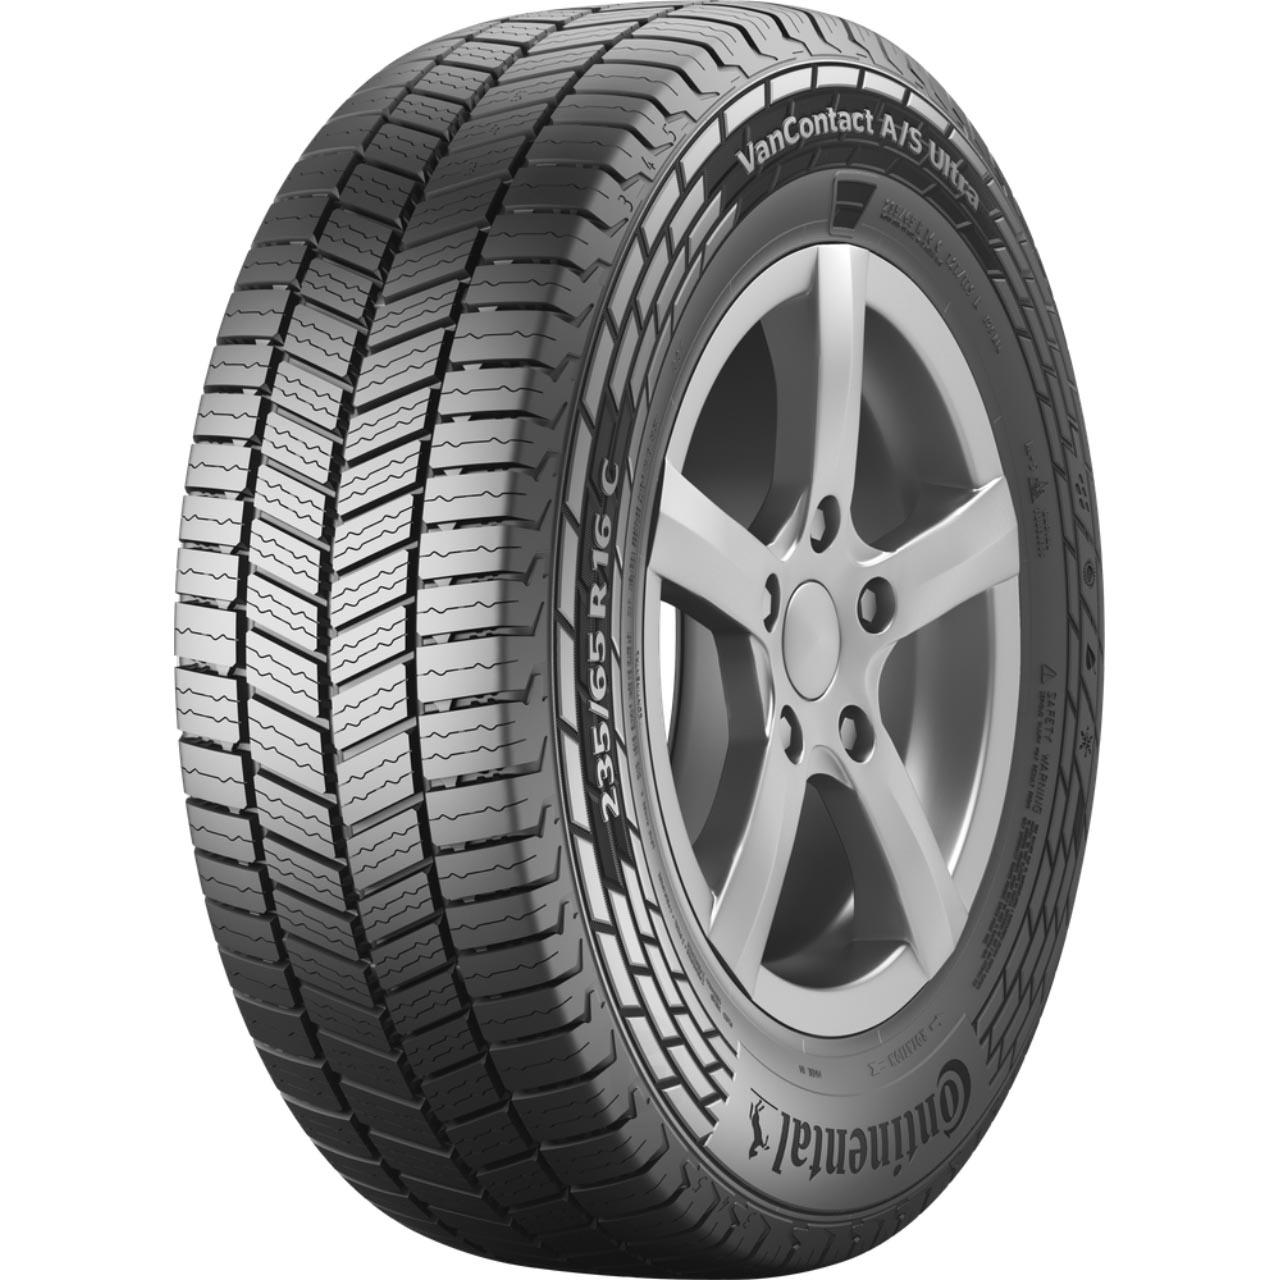 Continental VANCONTACT AS ULTRA 225/65R16C 112/110R